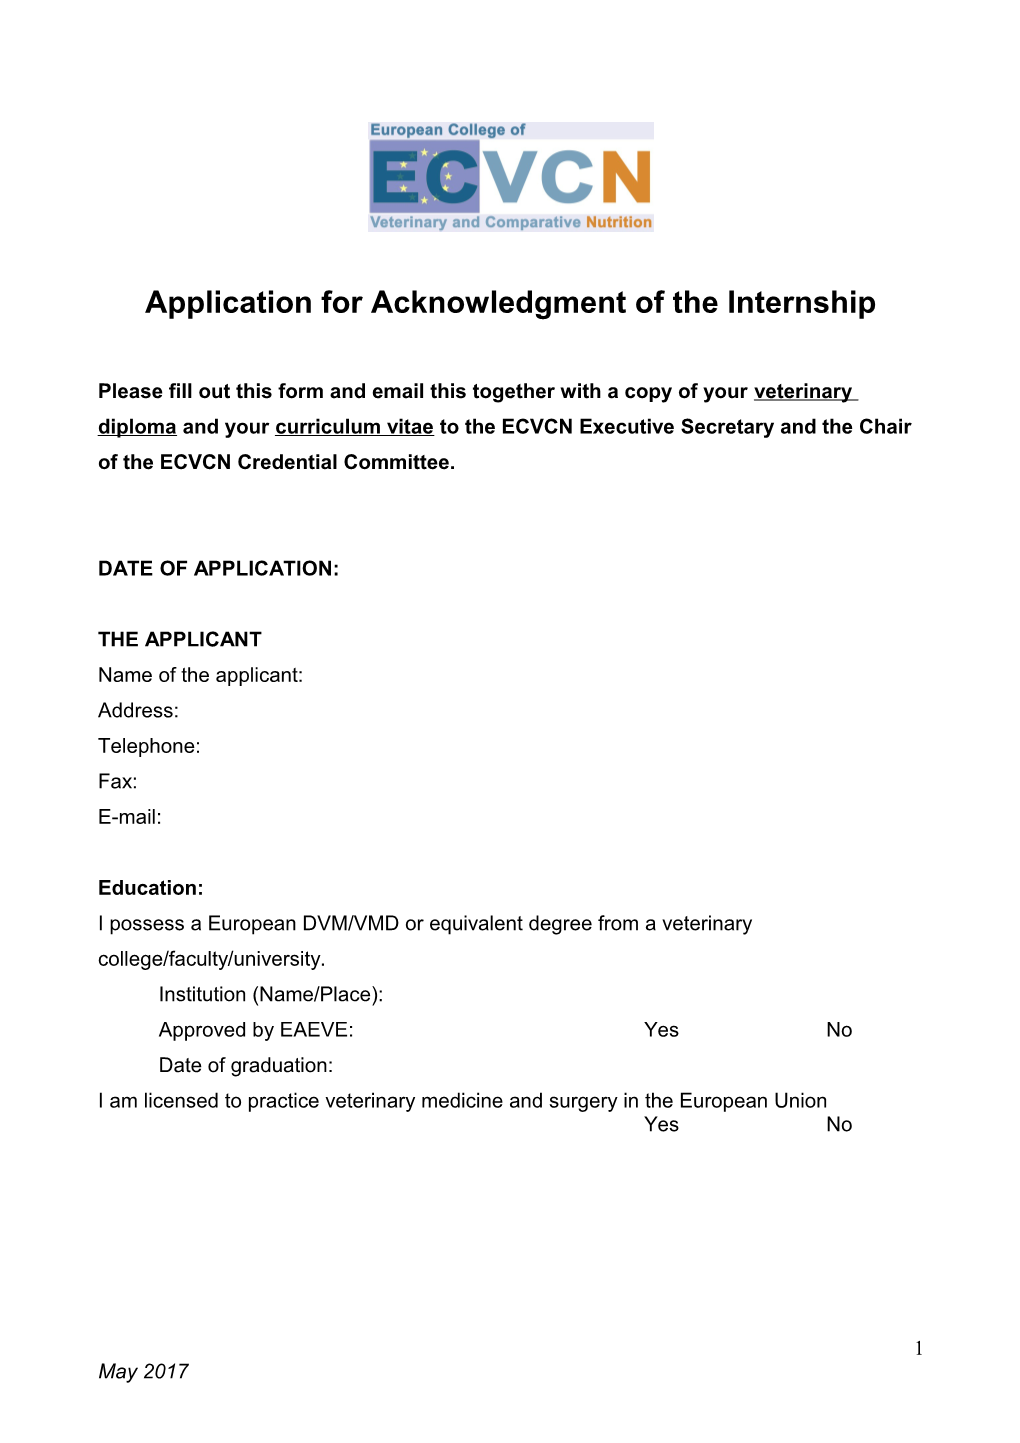 Application for Acknowledgment of the Internship